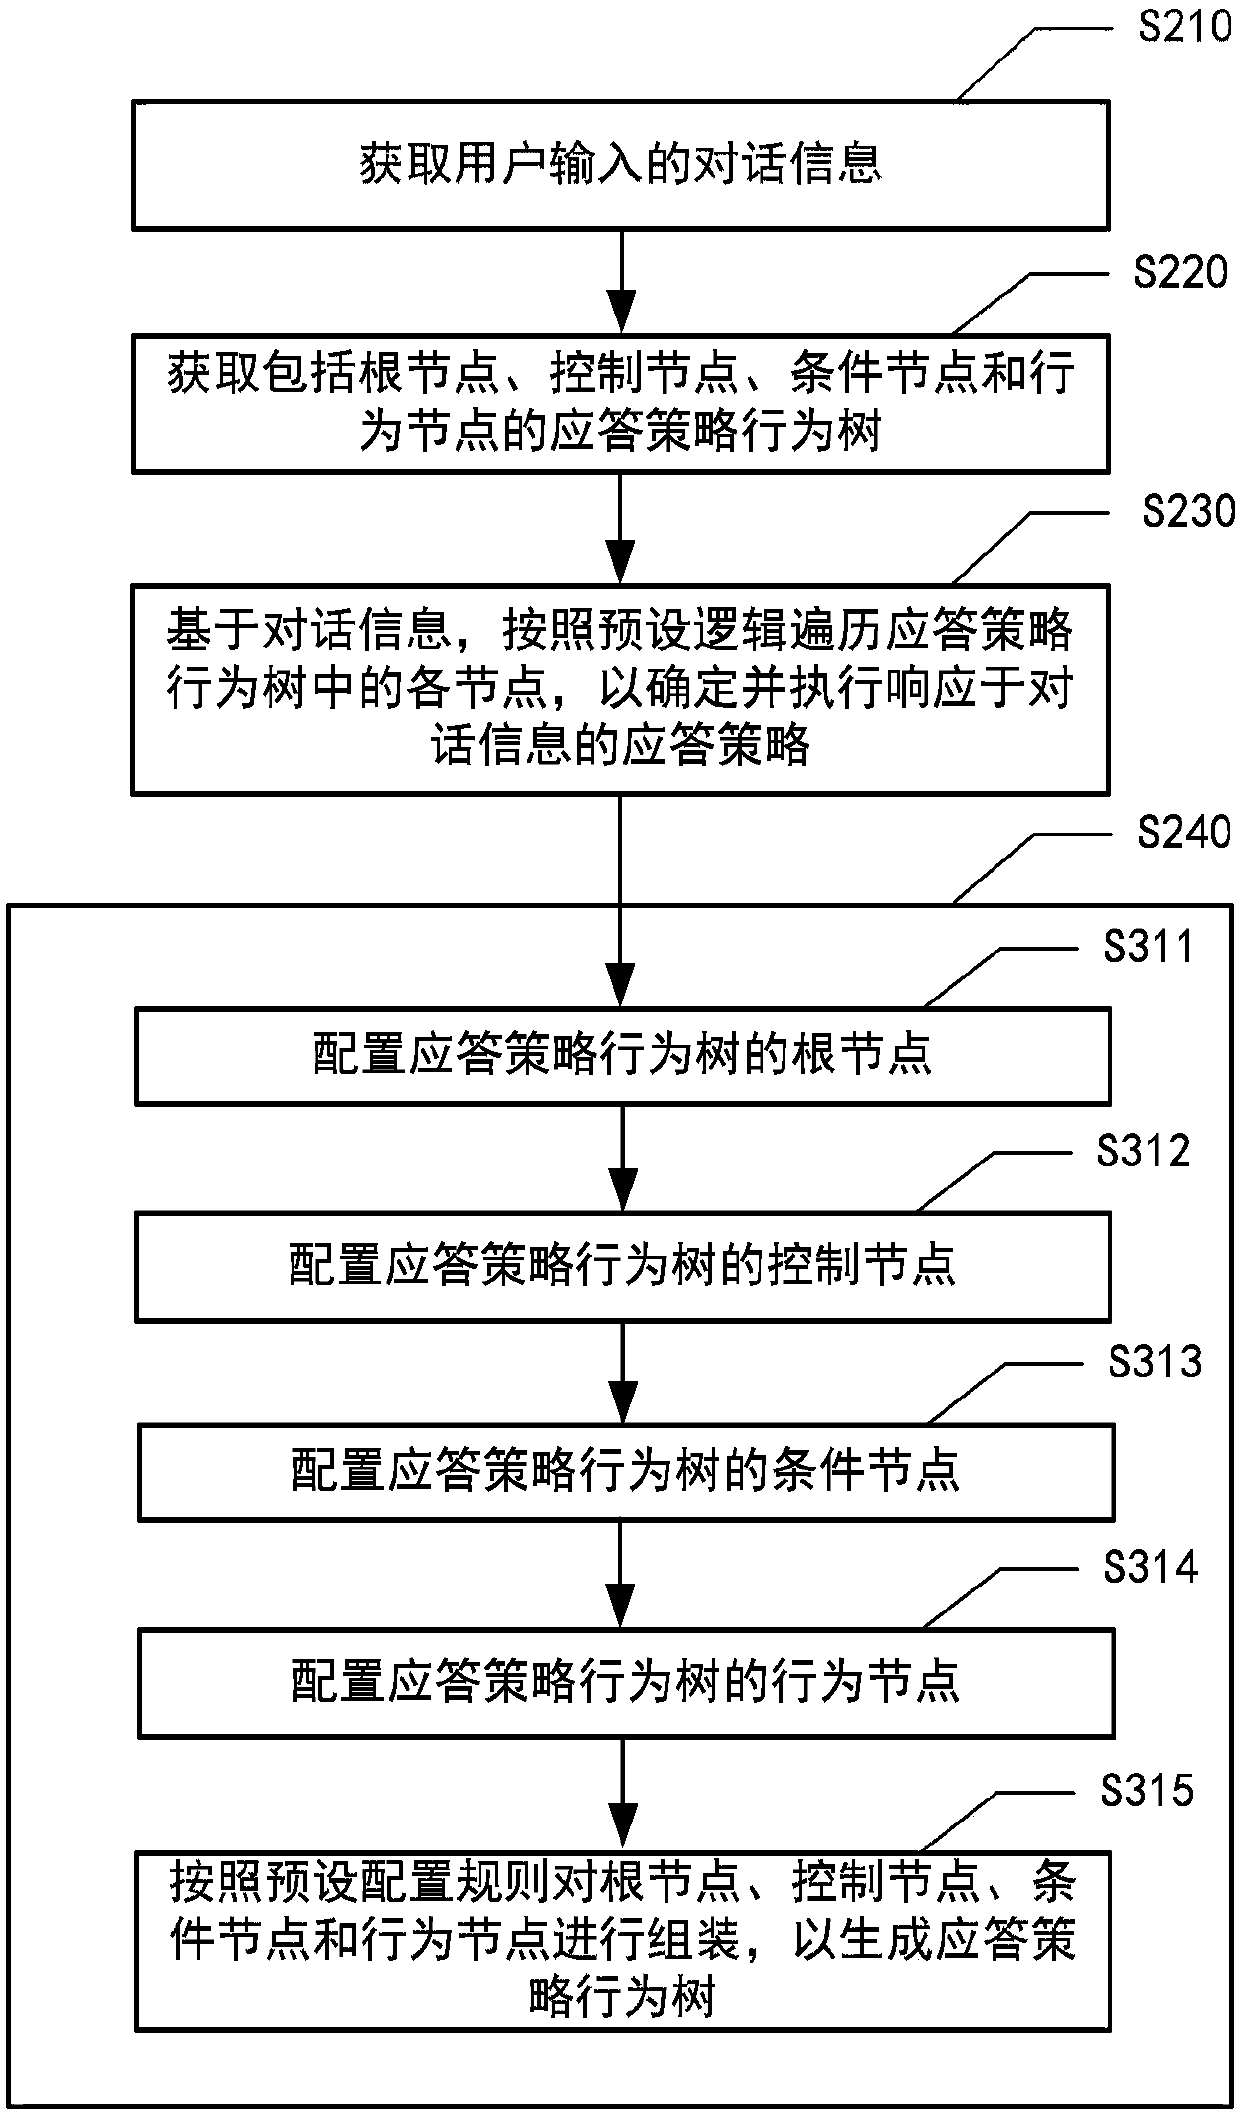 Response processing method and system, computer system and computer readable medium